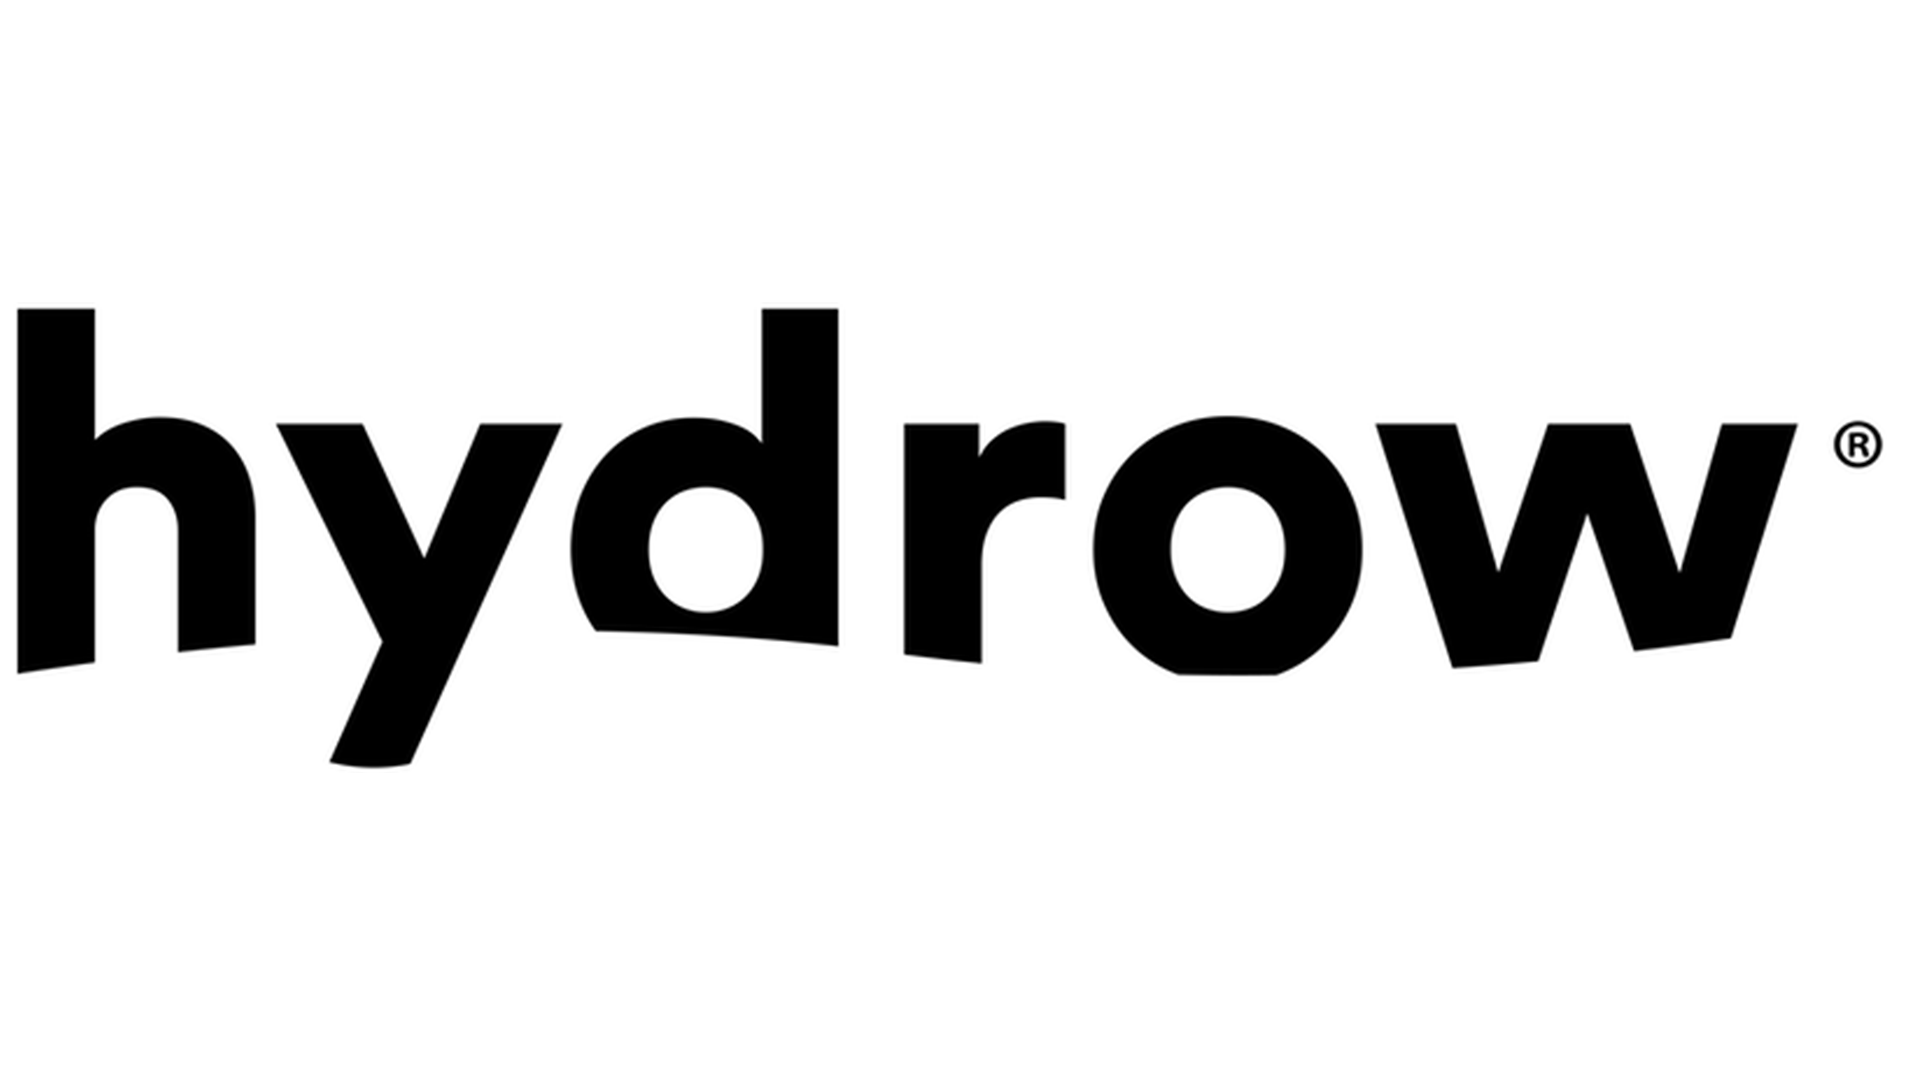 A black and white image of the word hydrows.